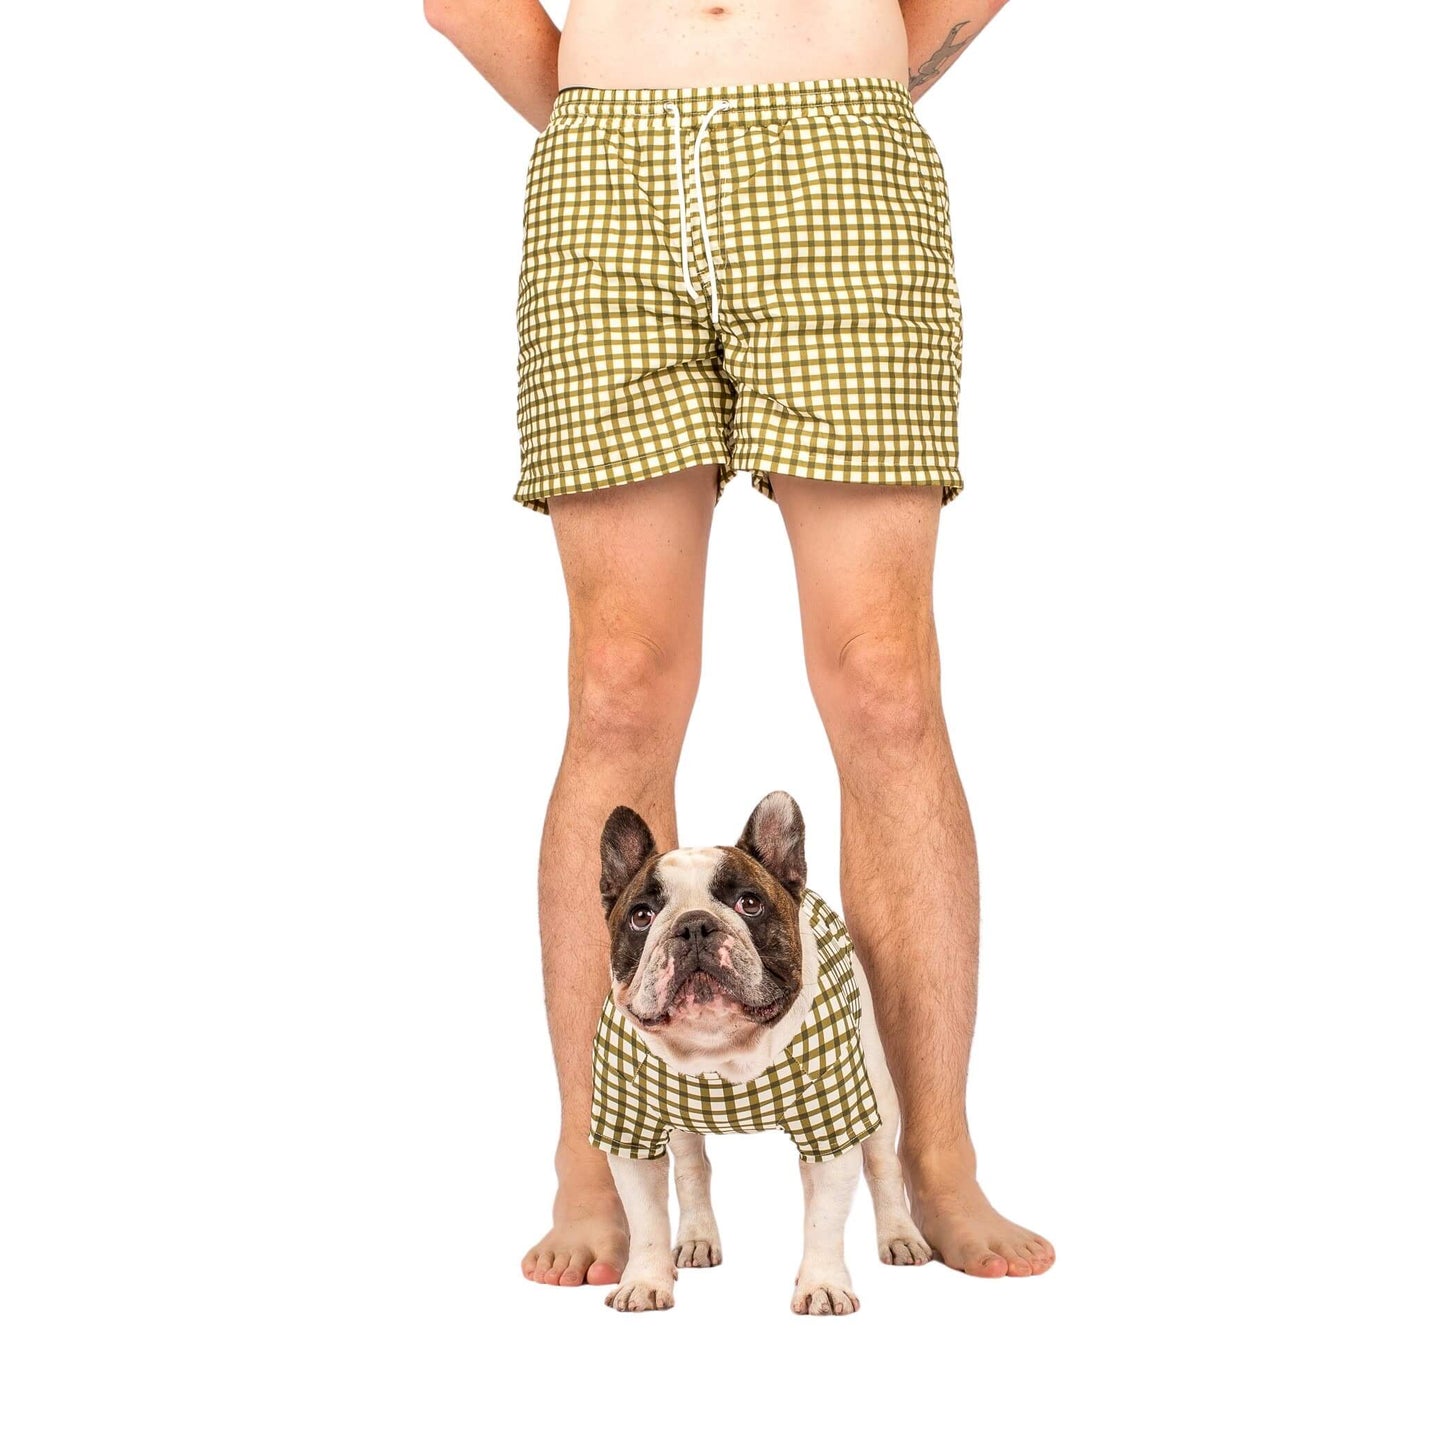 A Male model wearing Vibrant Hounds Green Gingham swimwear and French Bulldog wearing Vibrant Hounds Green Gingham Rash shirt.